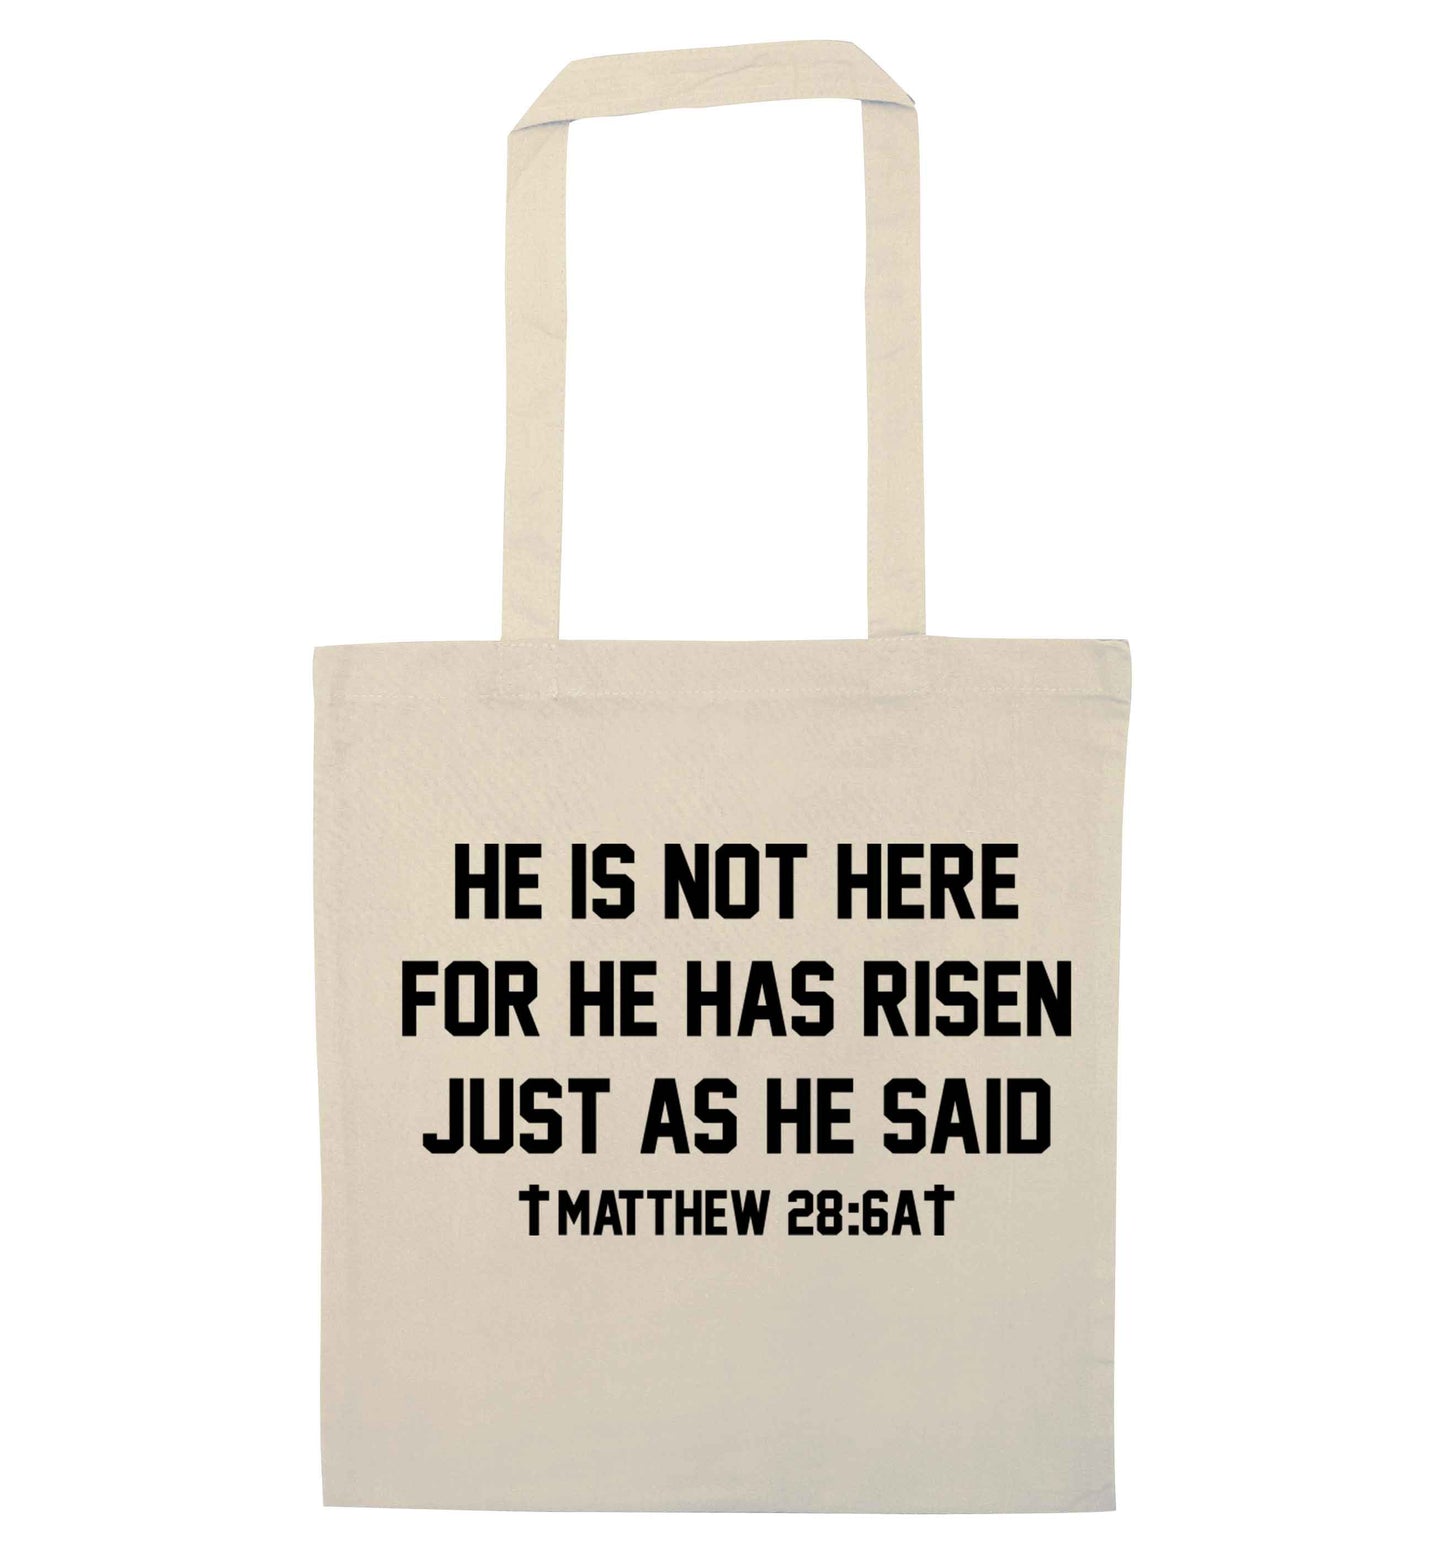 He is not here for he has risen just as he said matthew 28:6A natural tote bag